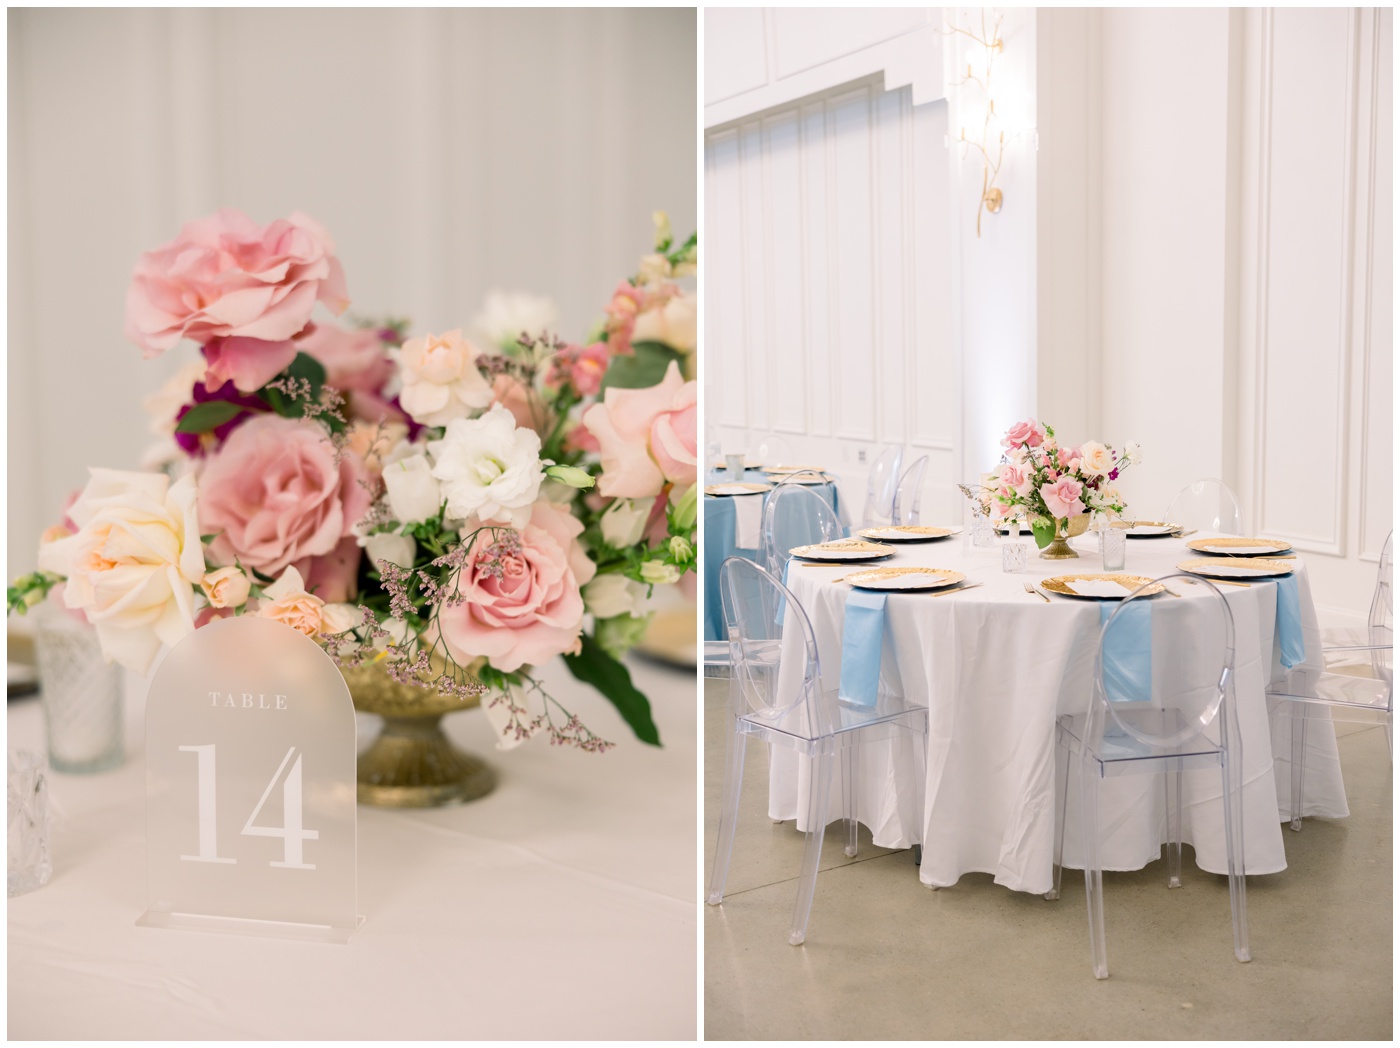 Reception details at the Peach Orchard